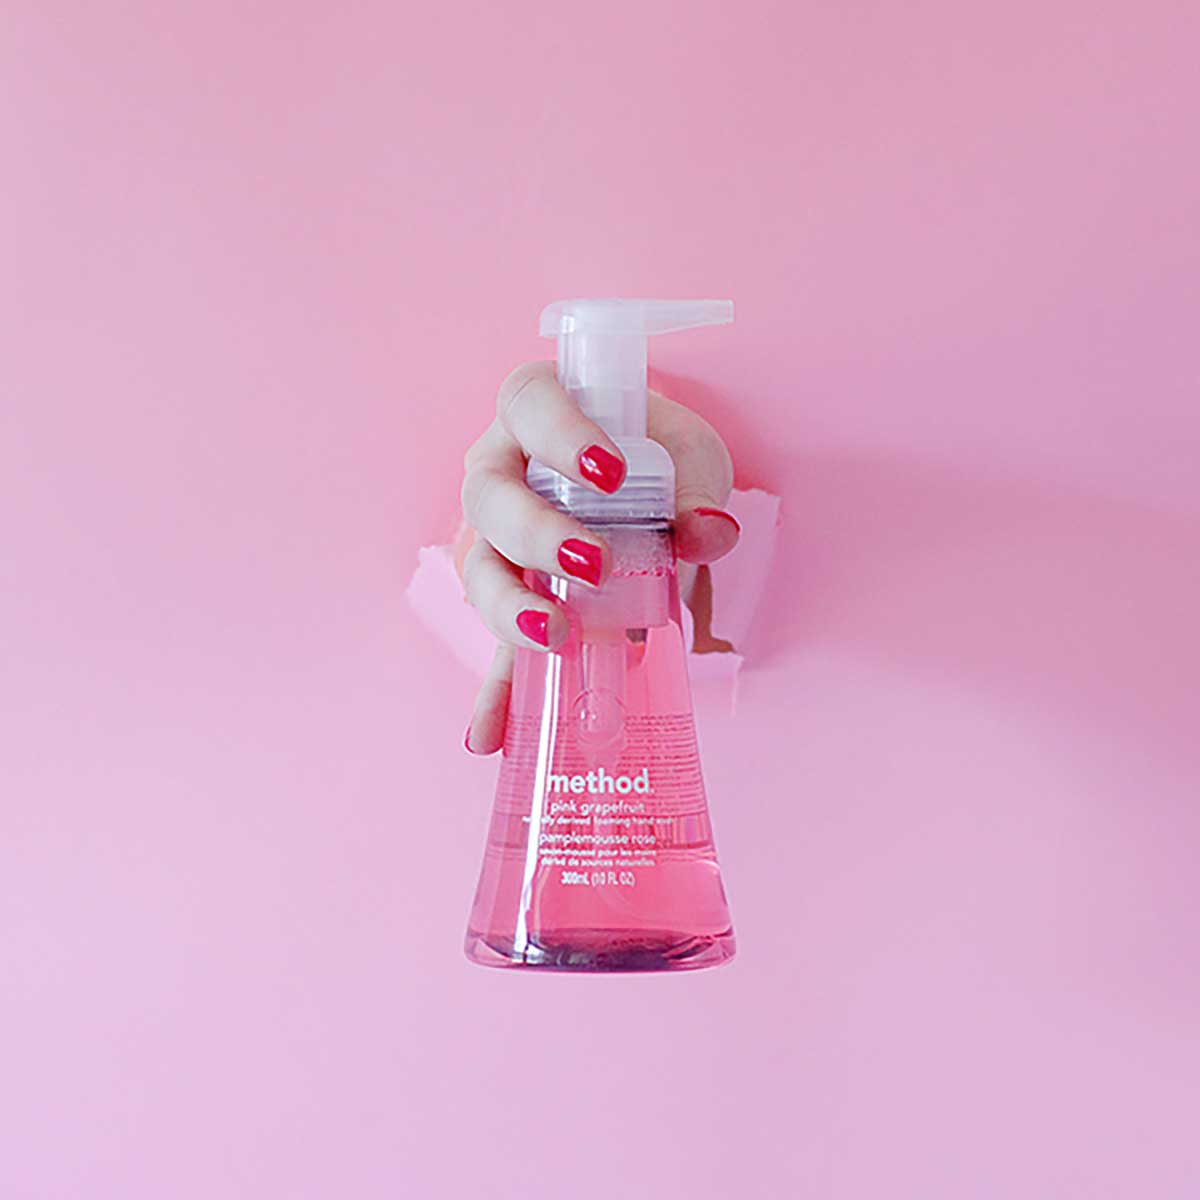 Meet I Have This Thing With Pink Content Creator Kyla Herbes this is the portfolio work she has completed for brands like Method cleaning products